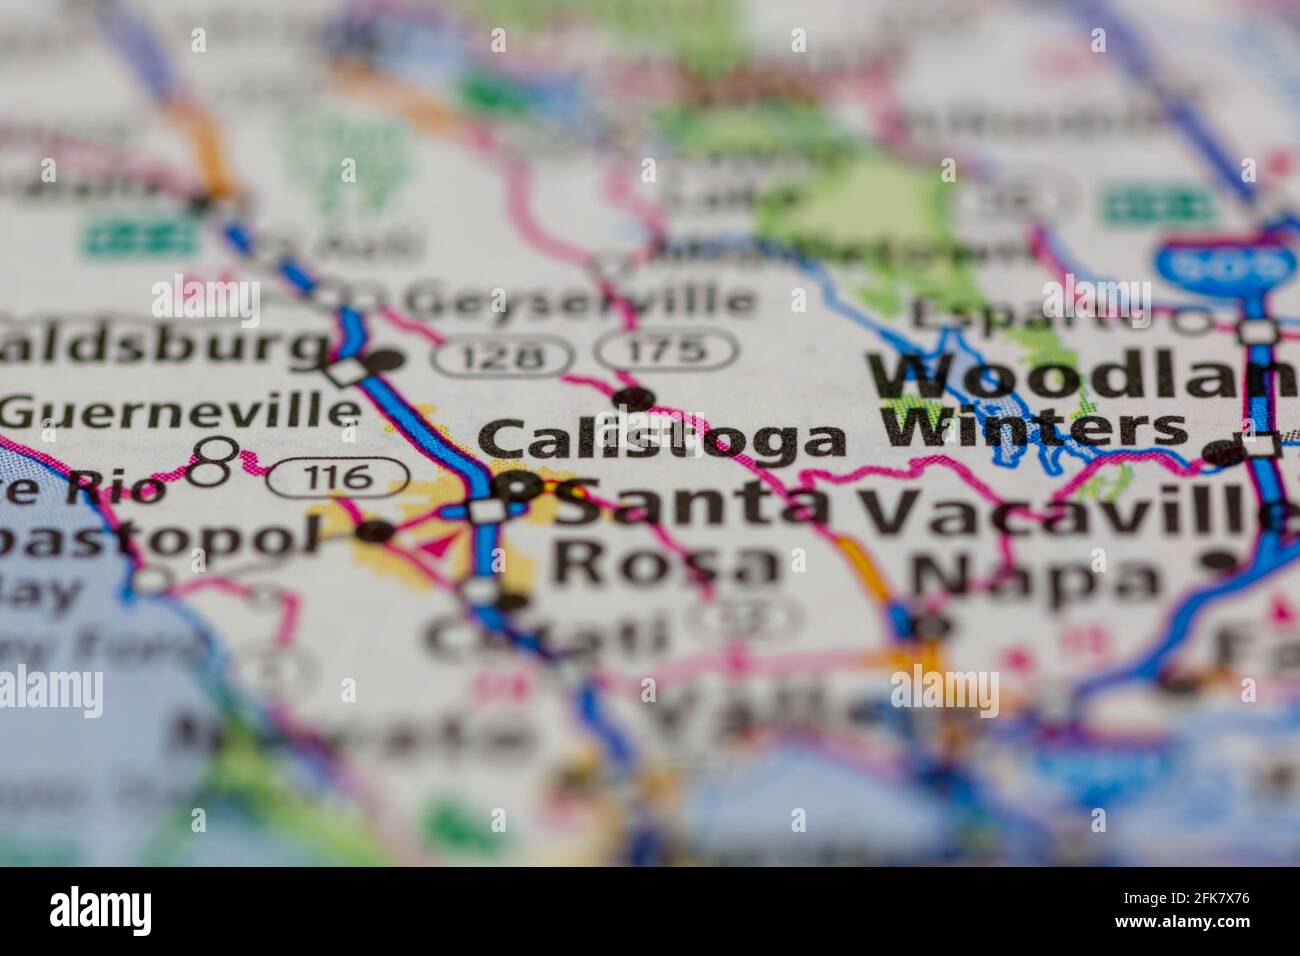 Calistoga California USA shown on a Geography map or road map Stock Photo